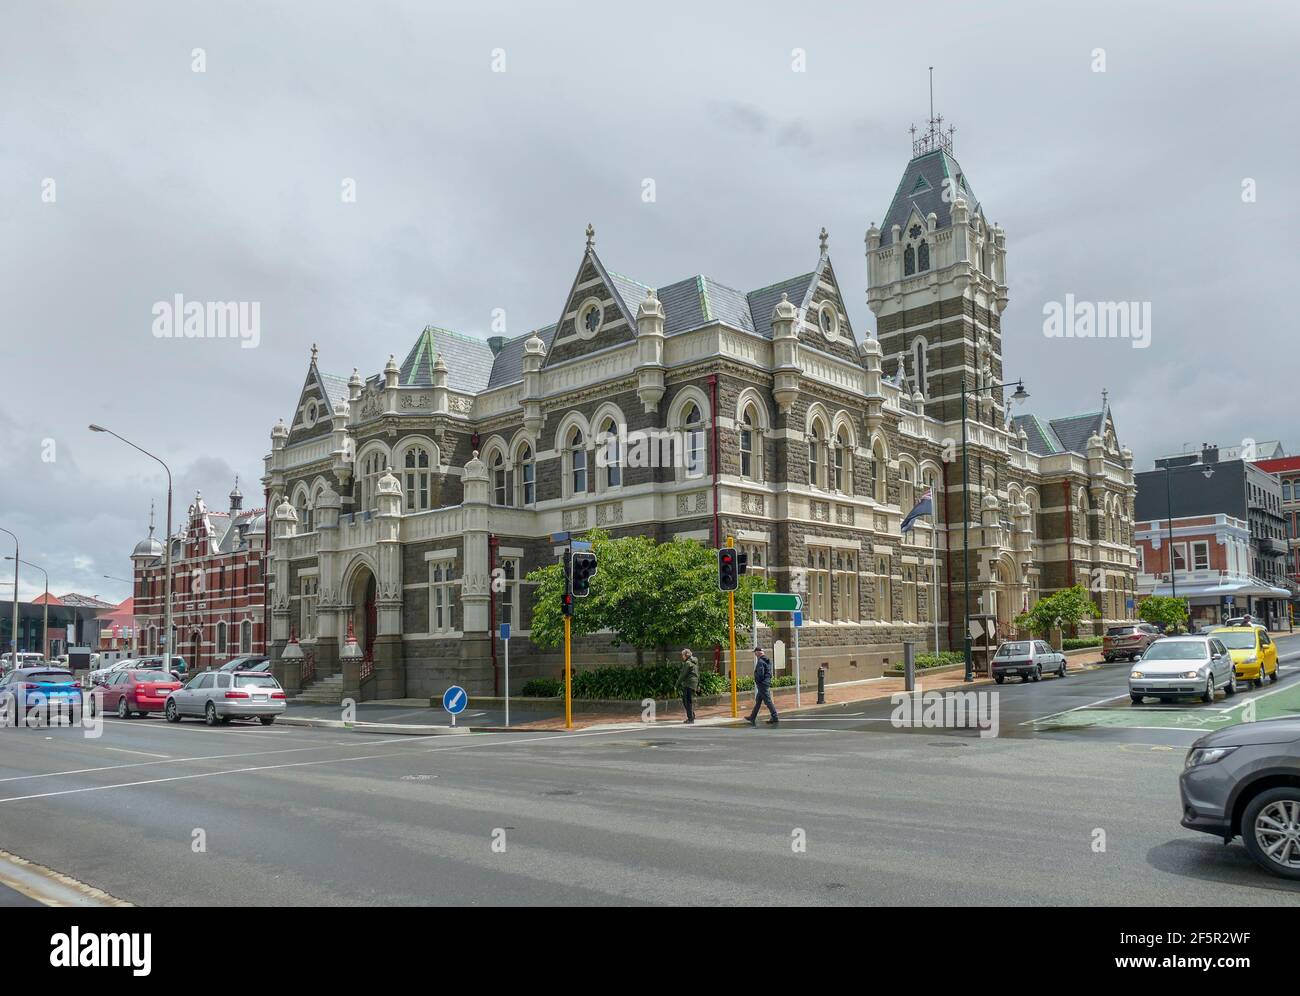 The Dunedin Railway Station in Dunedin, a city at the South Island of New Zealand Stock Photo